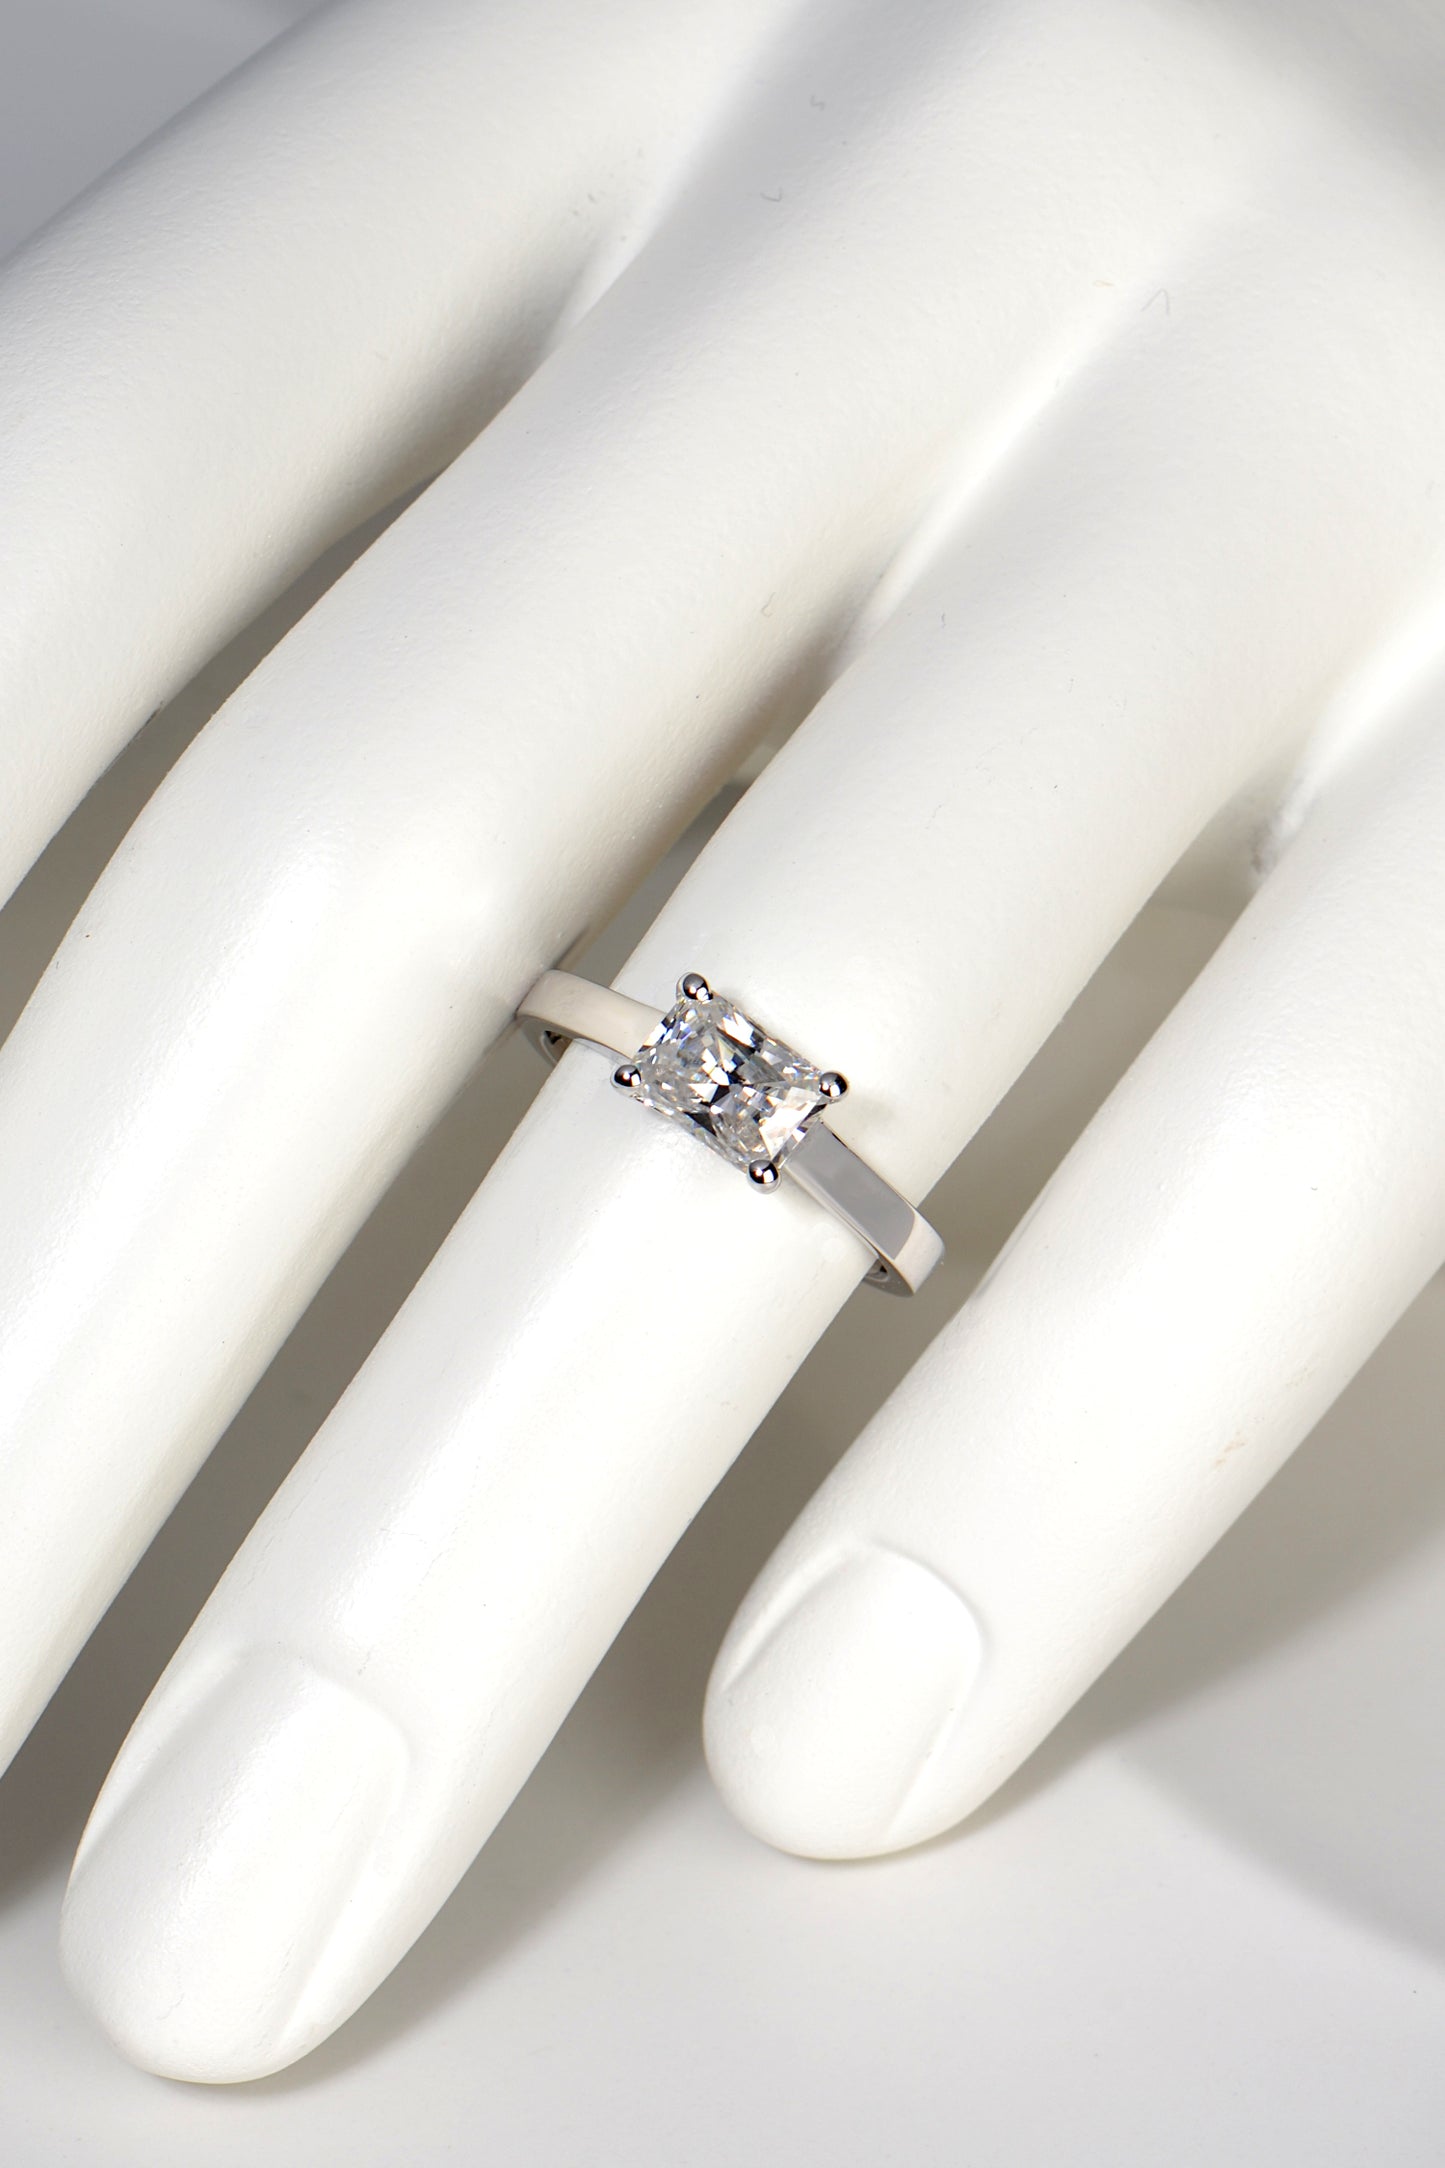 designer moissanite white gold ring on a finger to see how big it looks. It covers approximately half the finger with a quarter of the ring visible on either side of it. It looks impressive in size. 